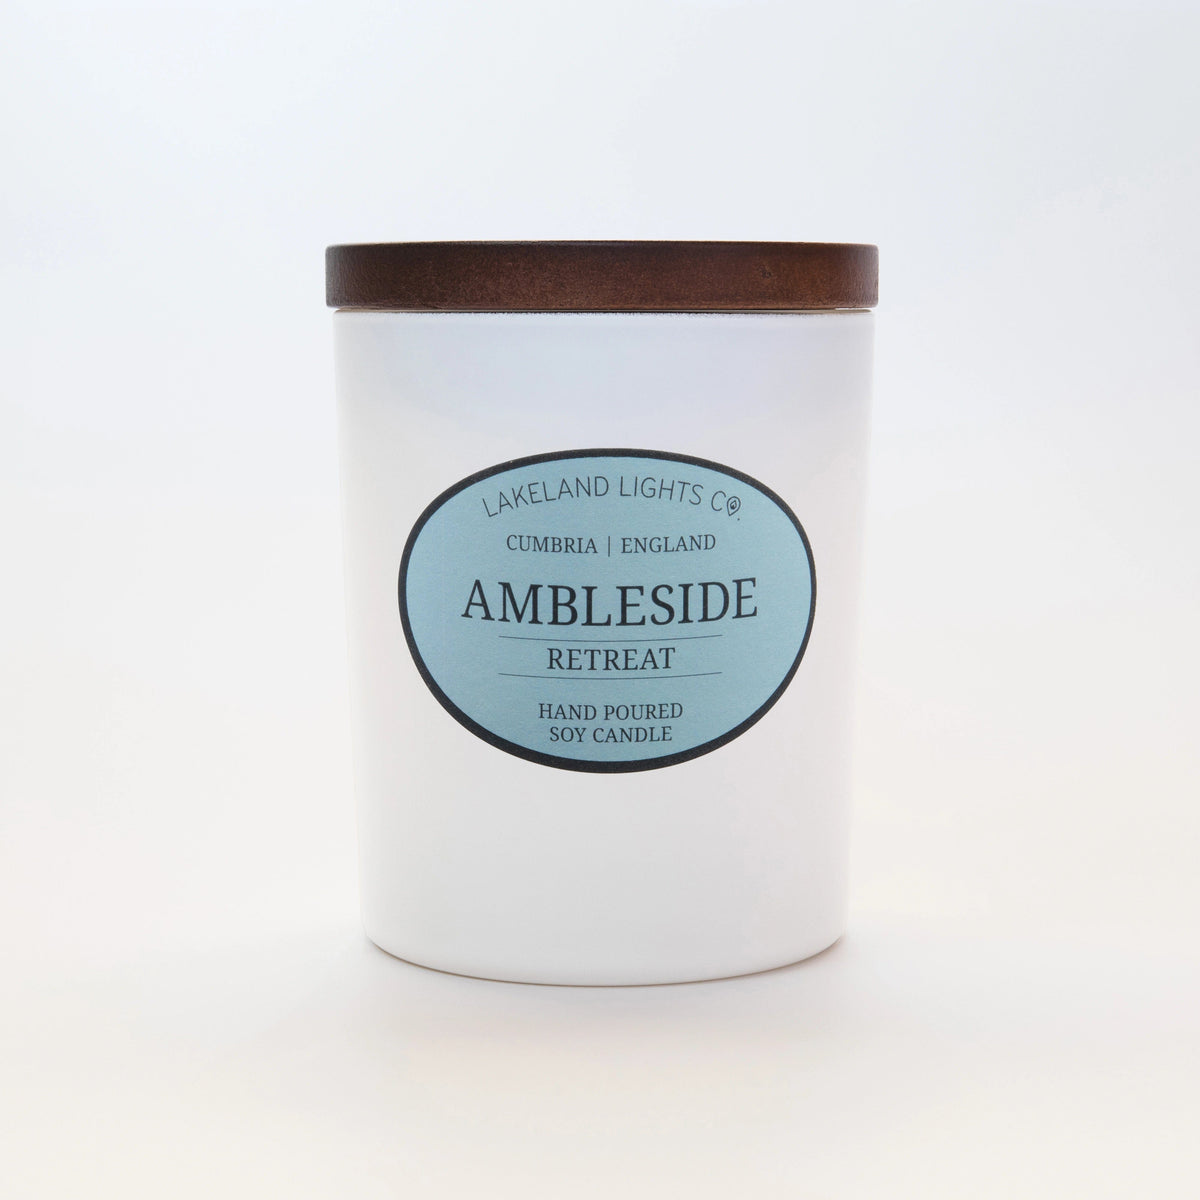 Ambleside Retreat soy candle by Lakeland Lights, showcasing the front label, featuring lavender, lemon, and jasmine scent.